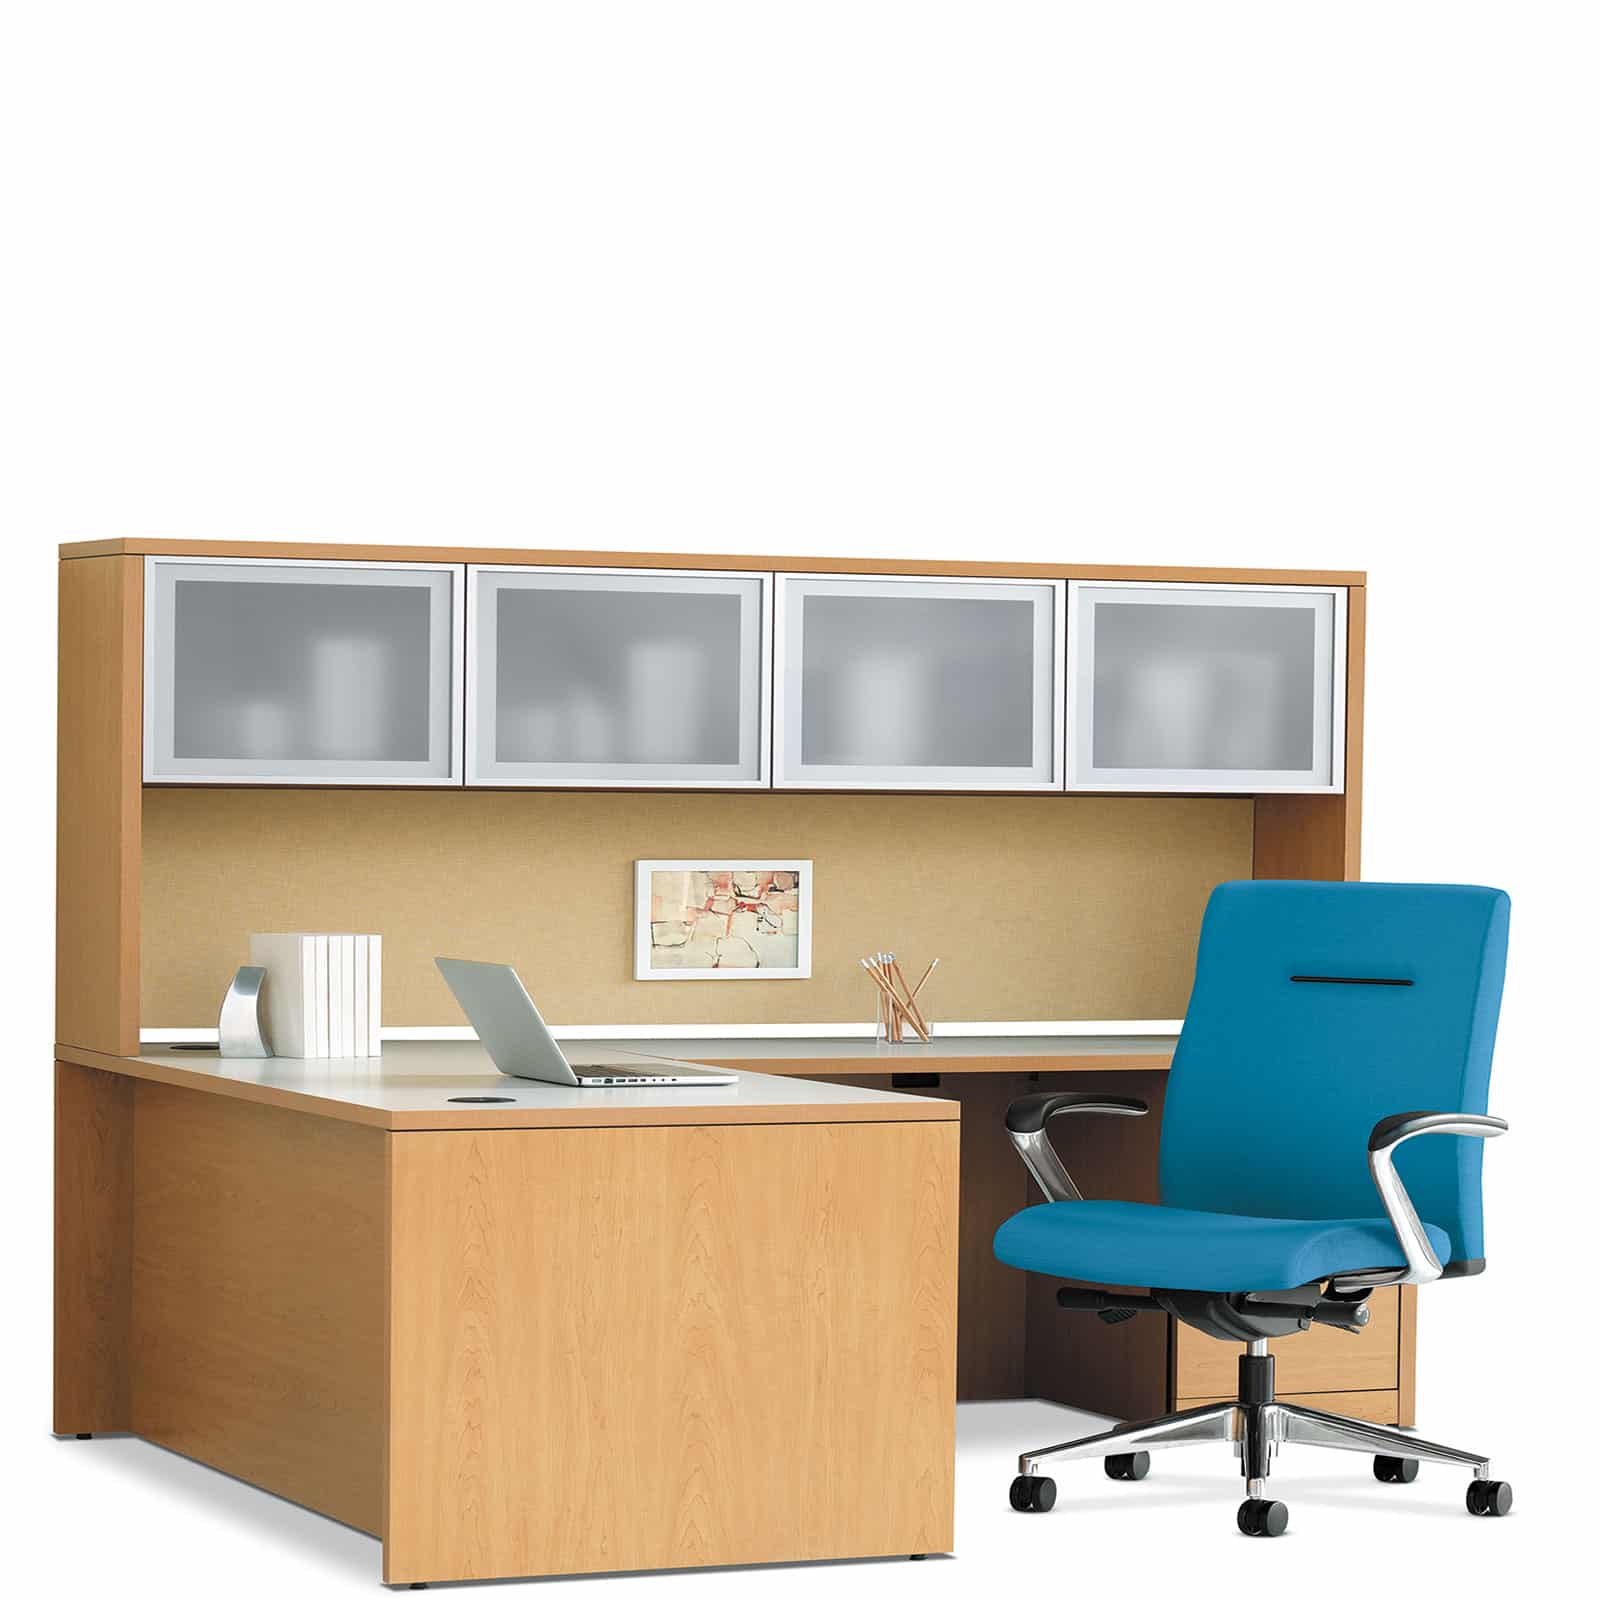 Hon 10500 Series L Executive Office Trader Boys Office Furniture